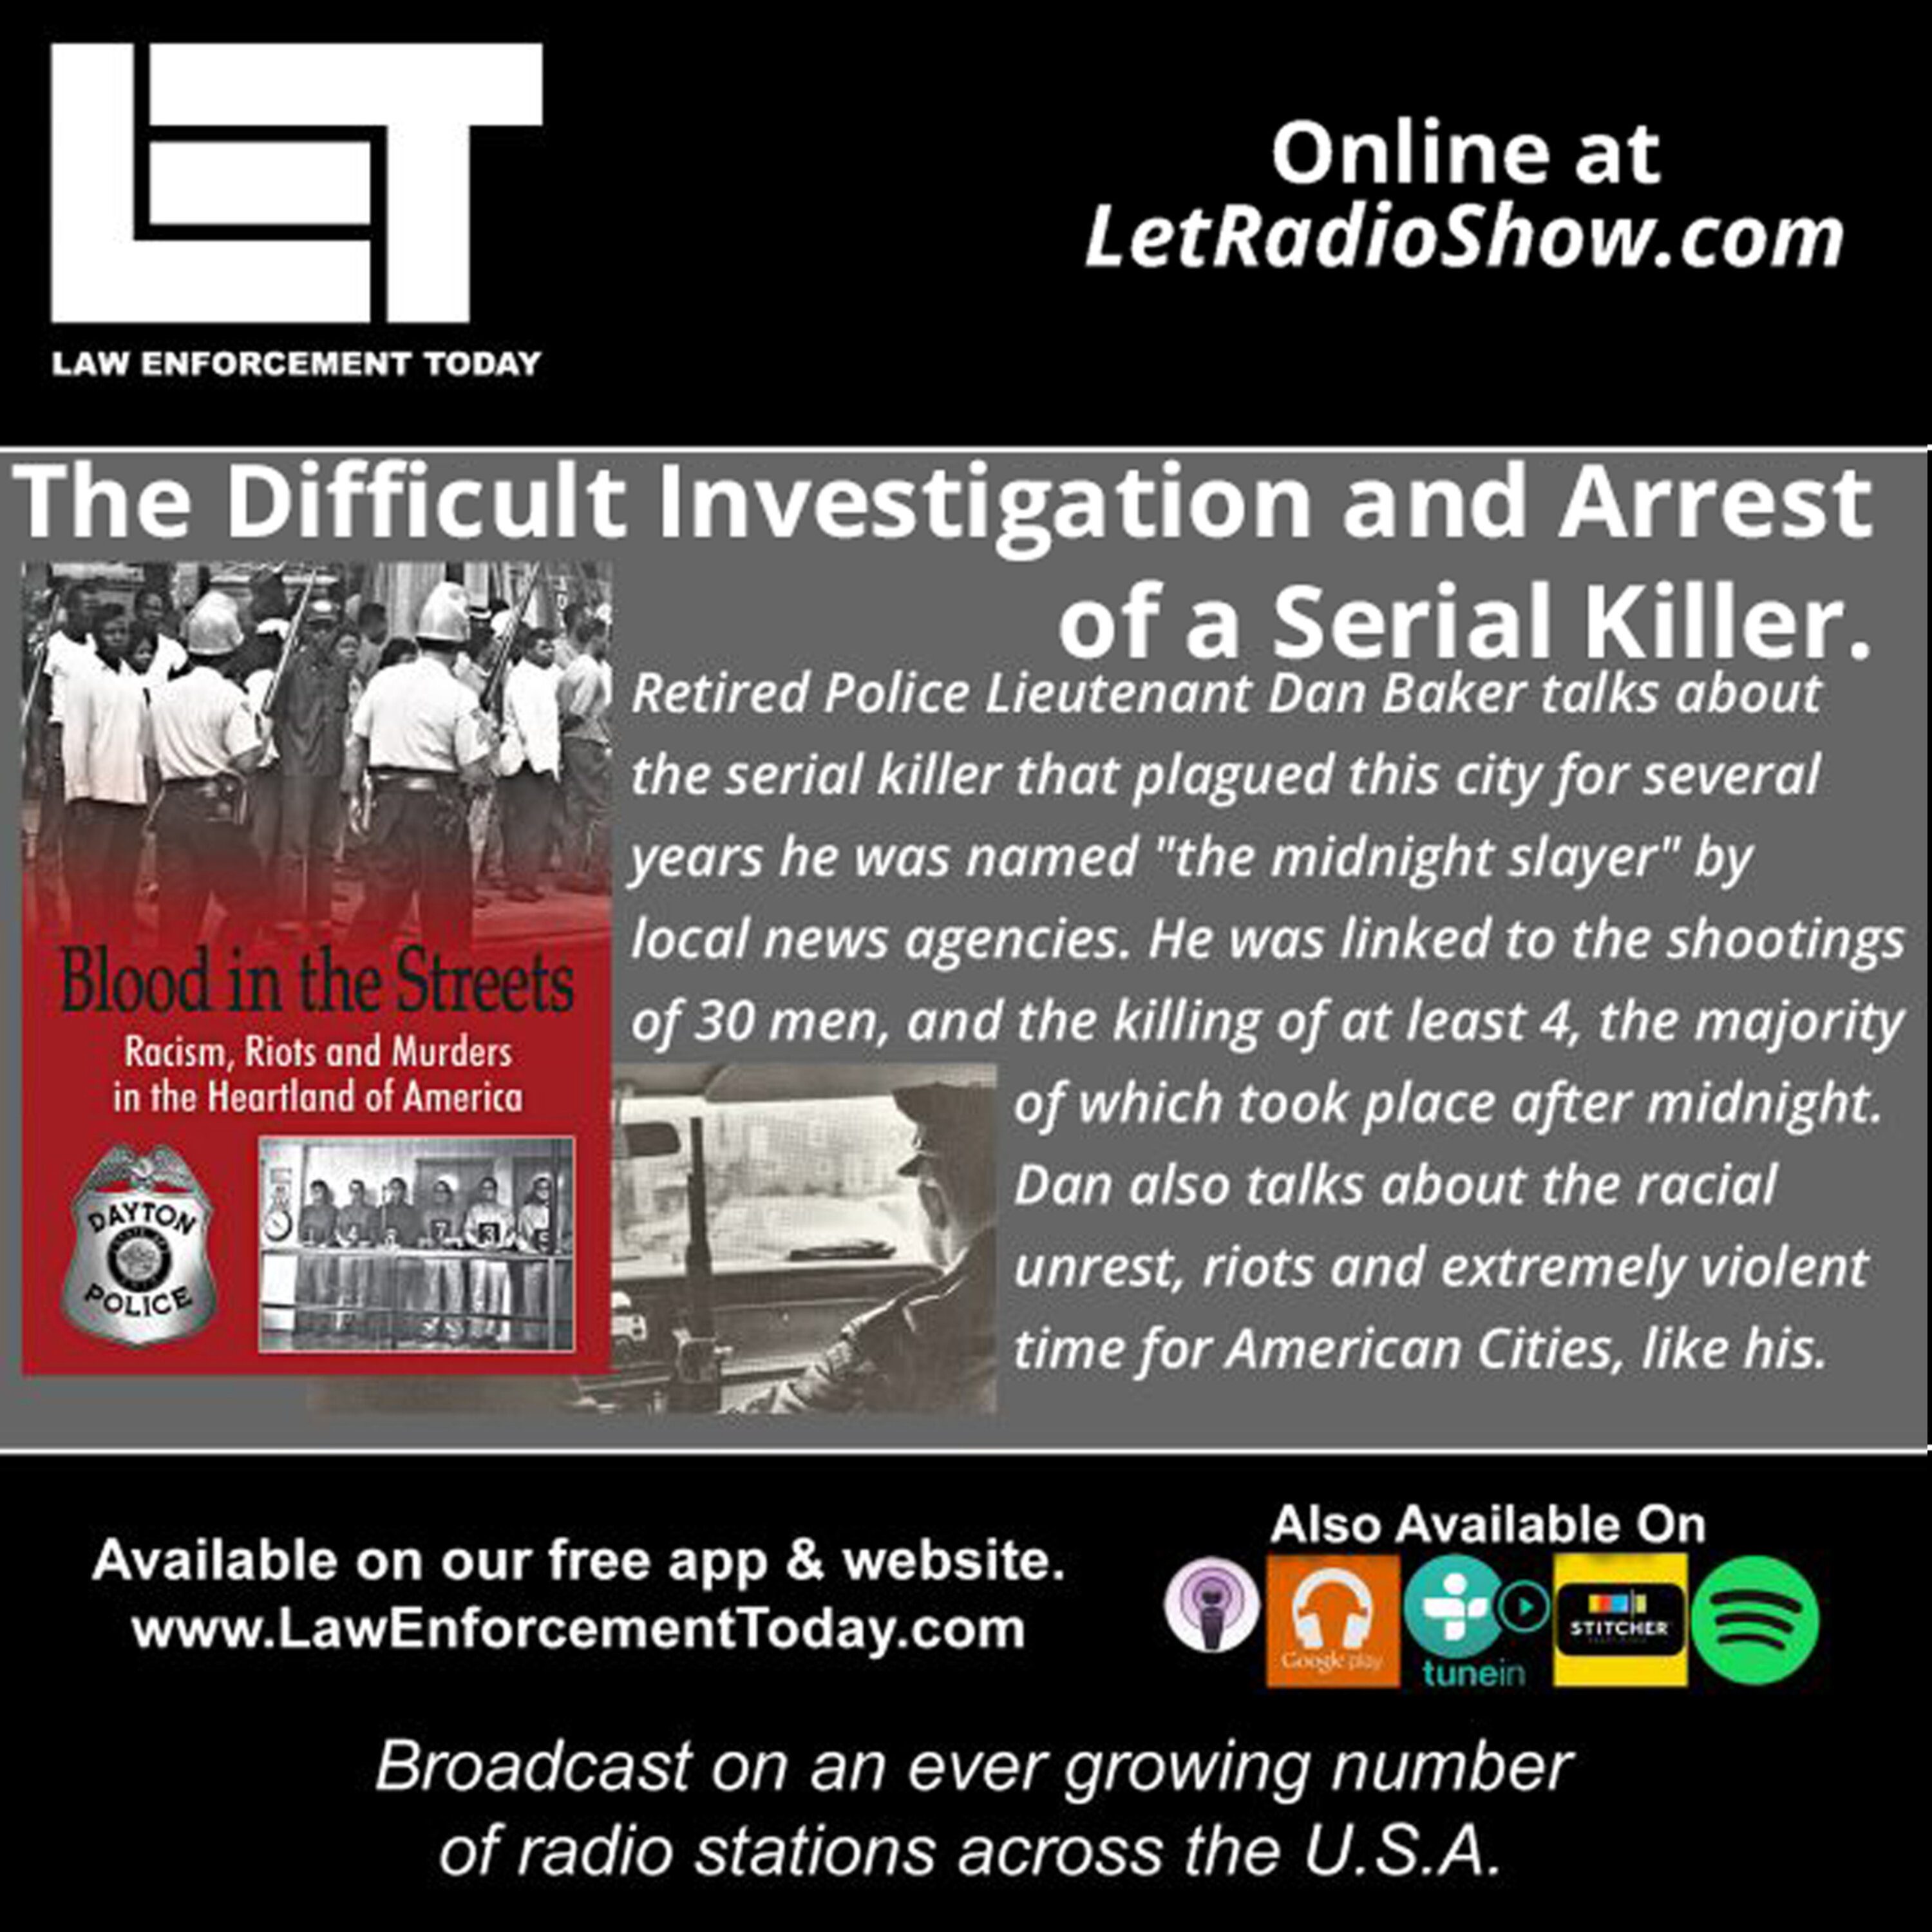 S6E28: The Difficult Investigation and Arrest of a Serial Killer. Special Episode.